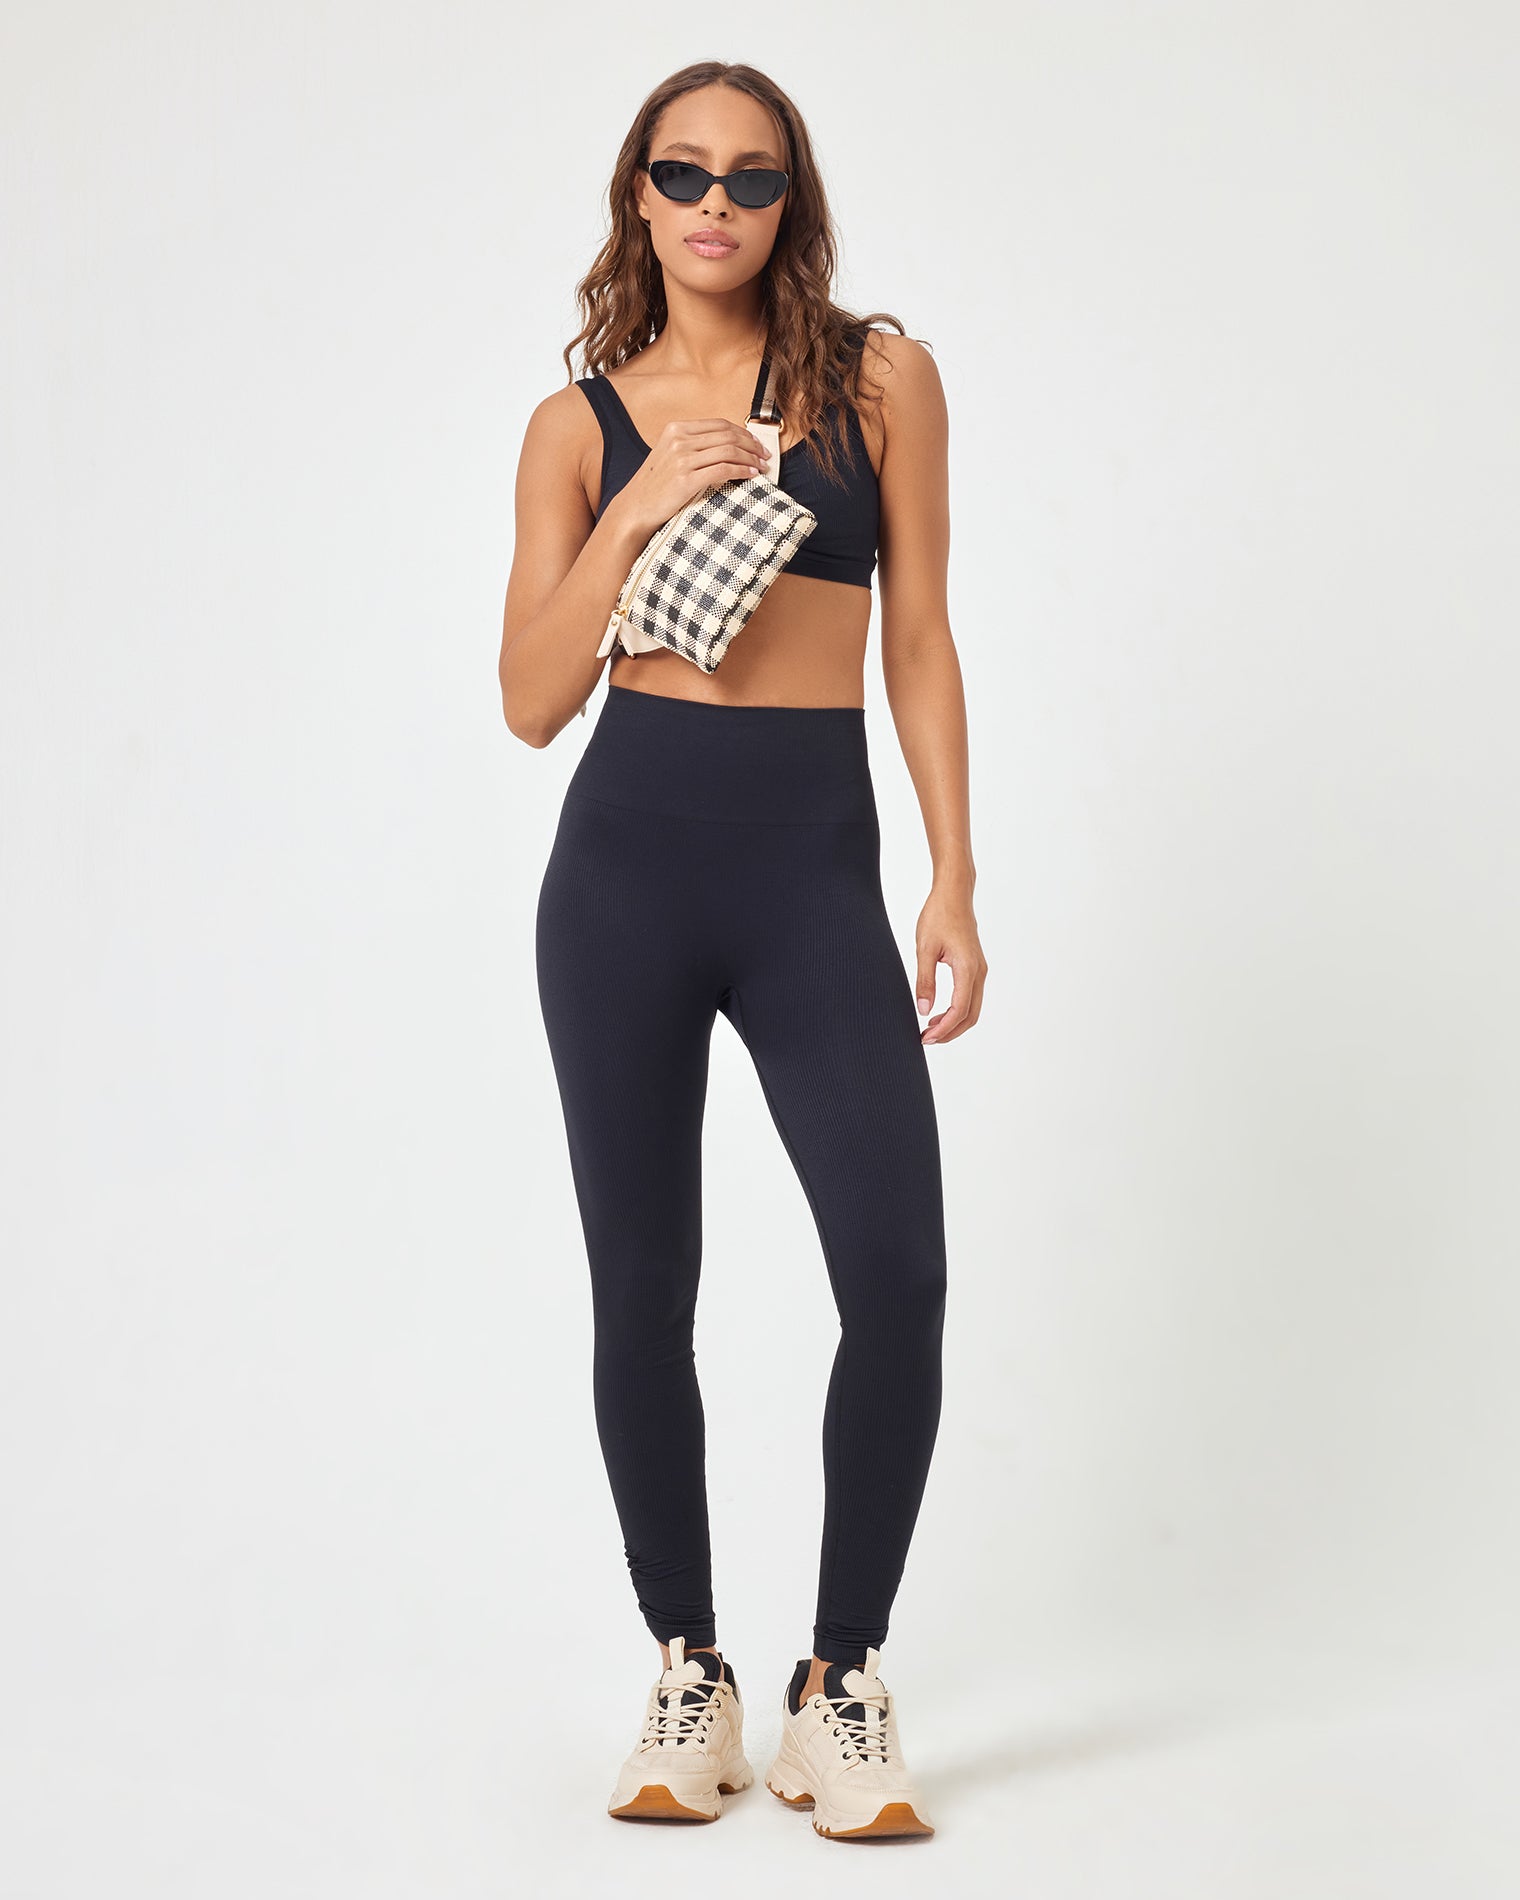 Buy STOP Pink Fitted Full Length Cotton Lycra Women's Leggings | Shoppers  Stop